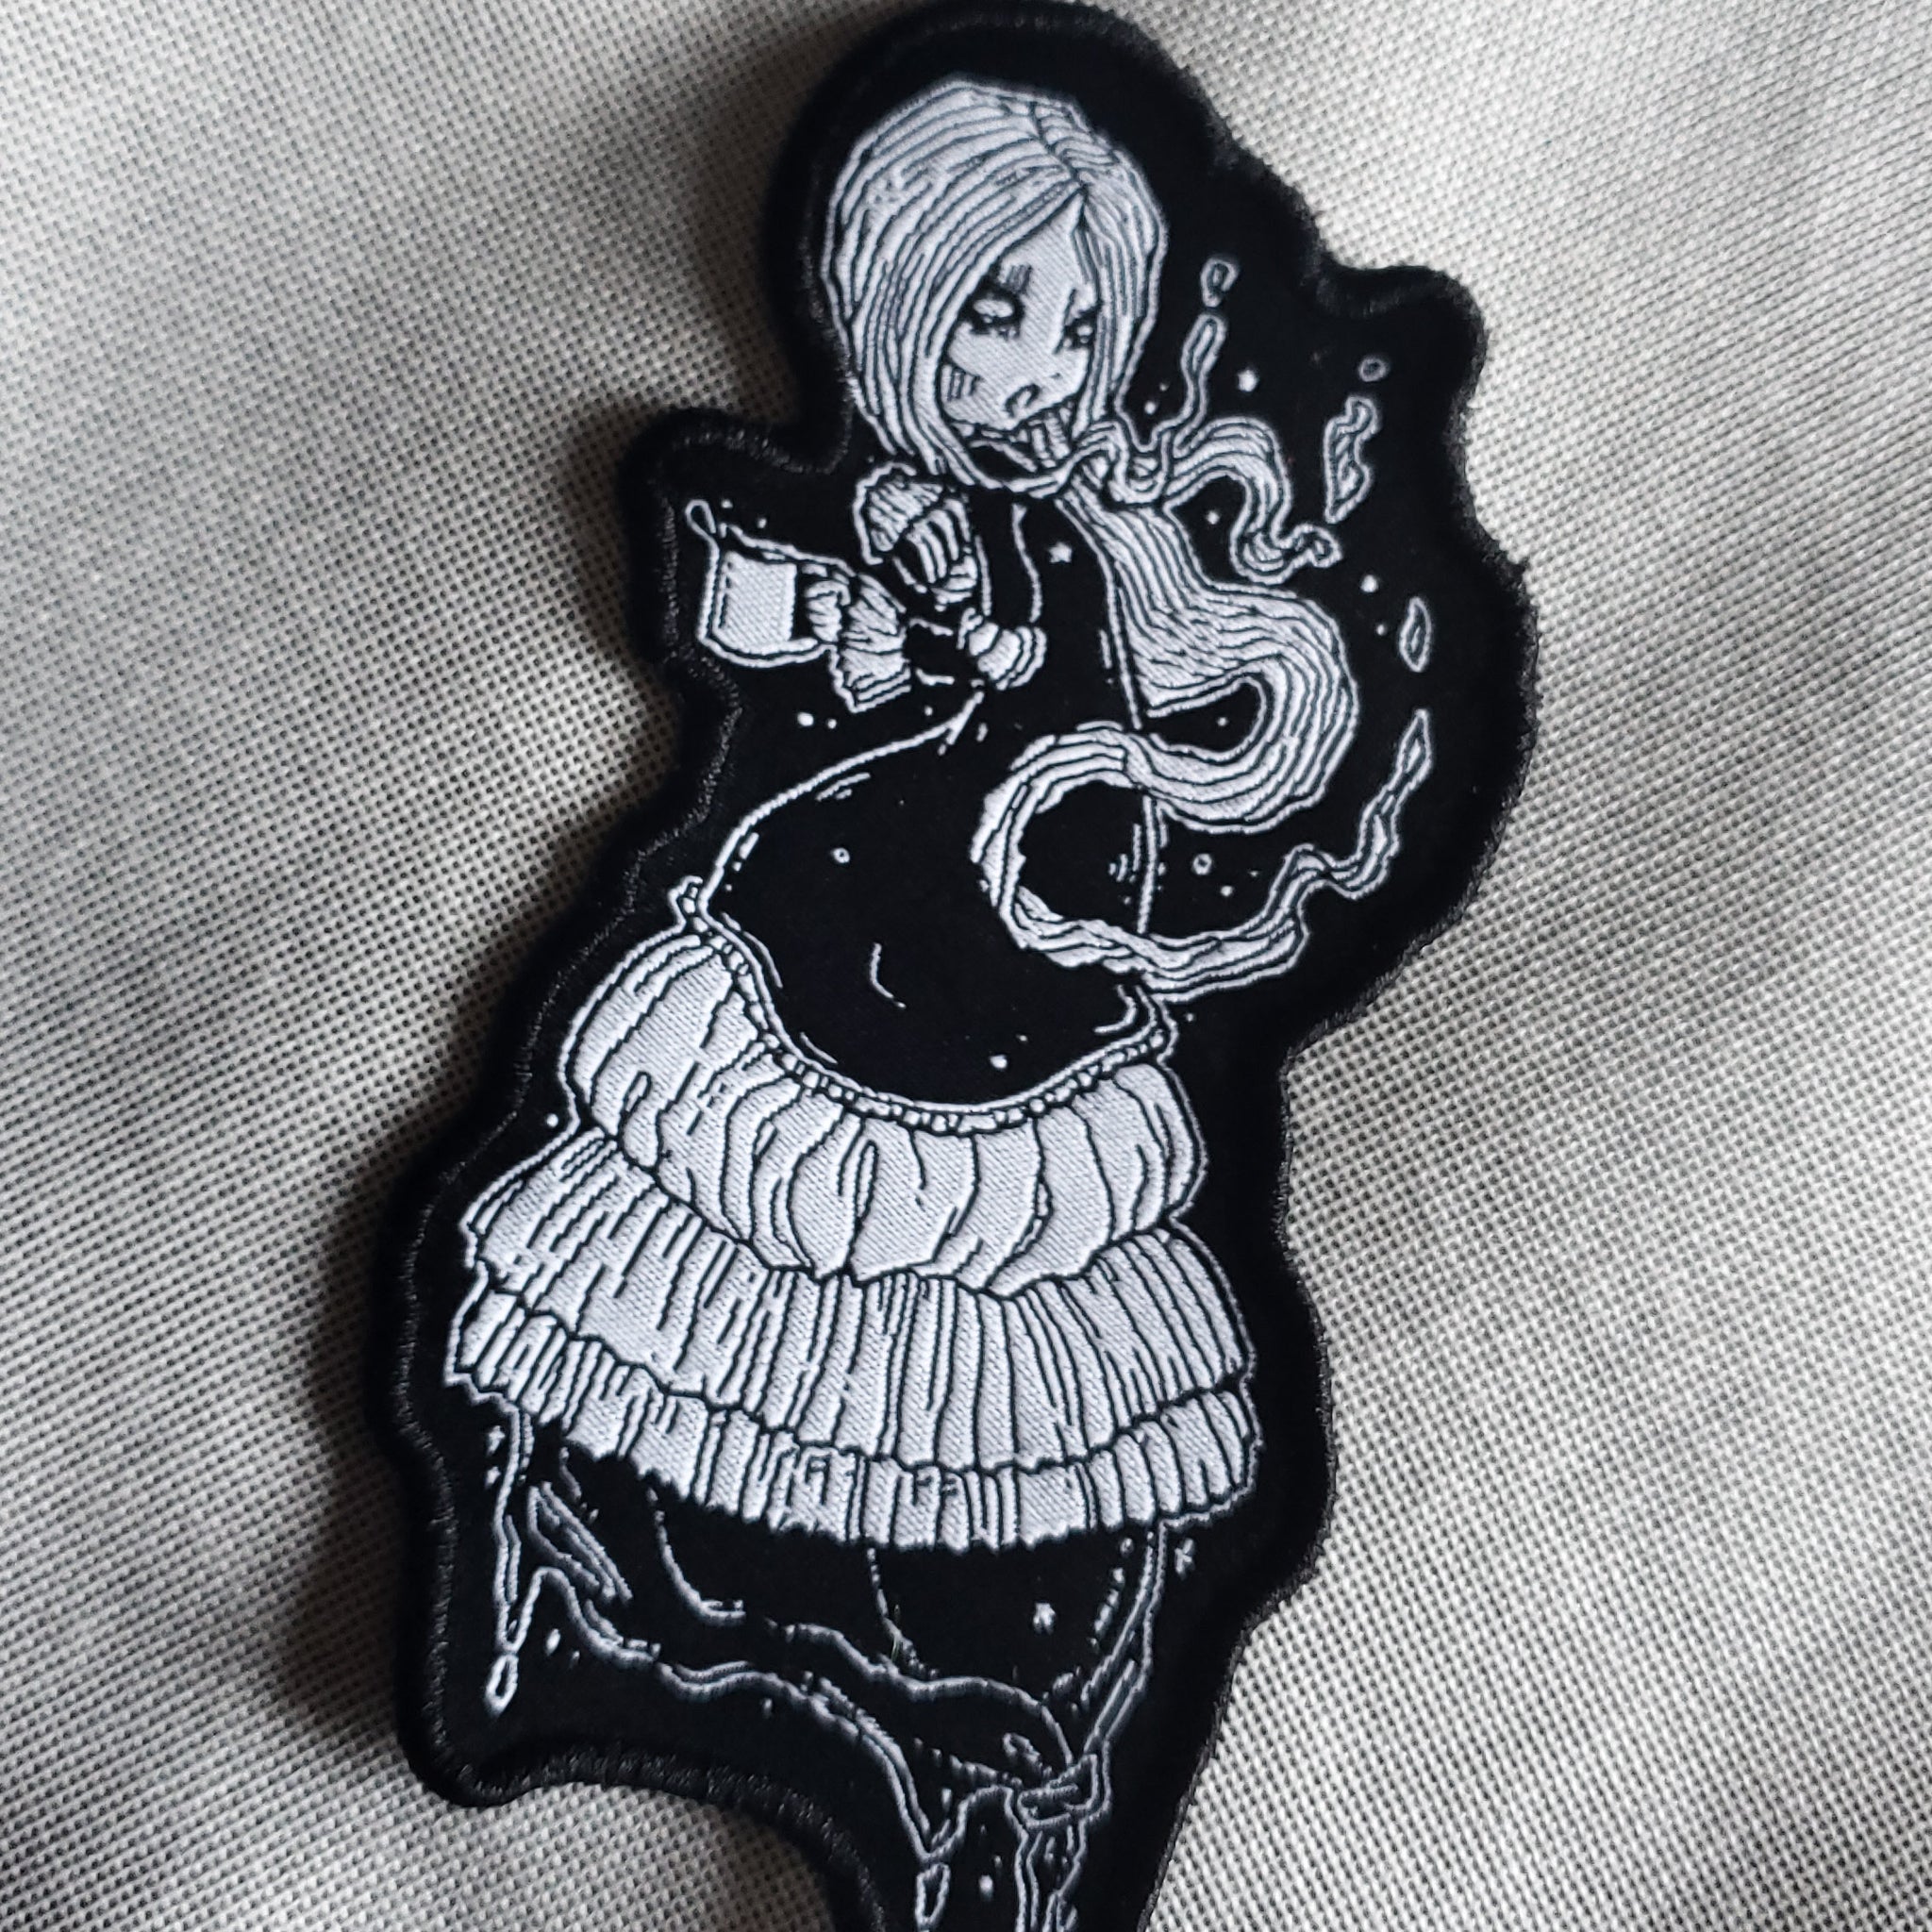 Mourning Brew patch